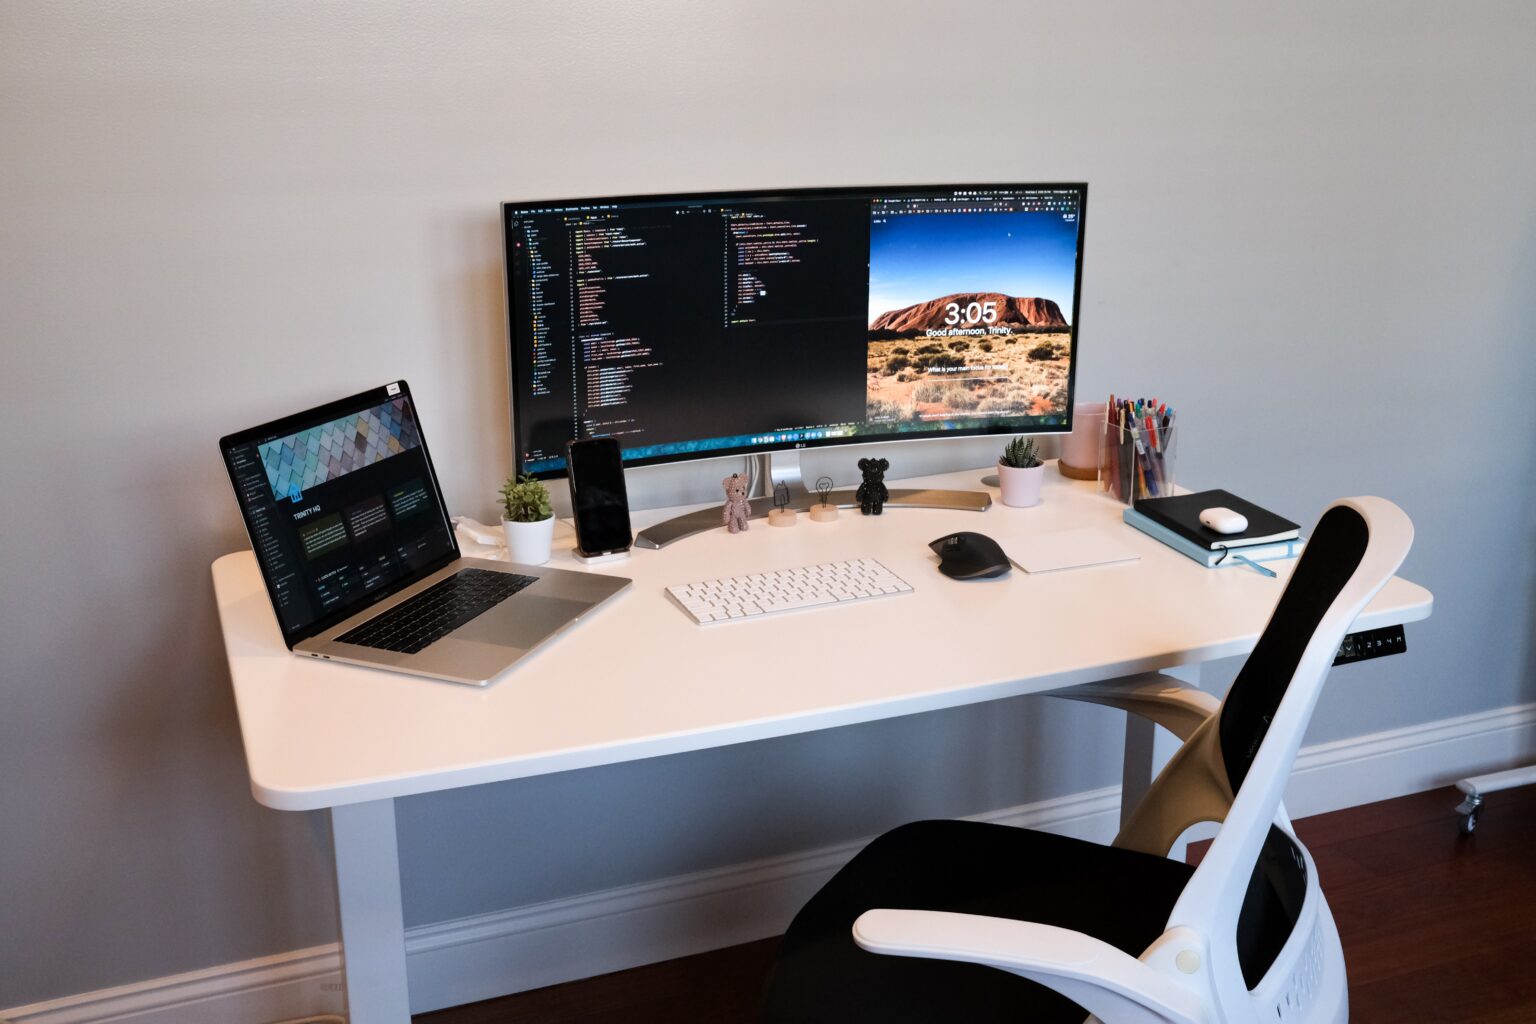 Furniture For A Productive Home Office Setup